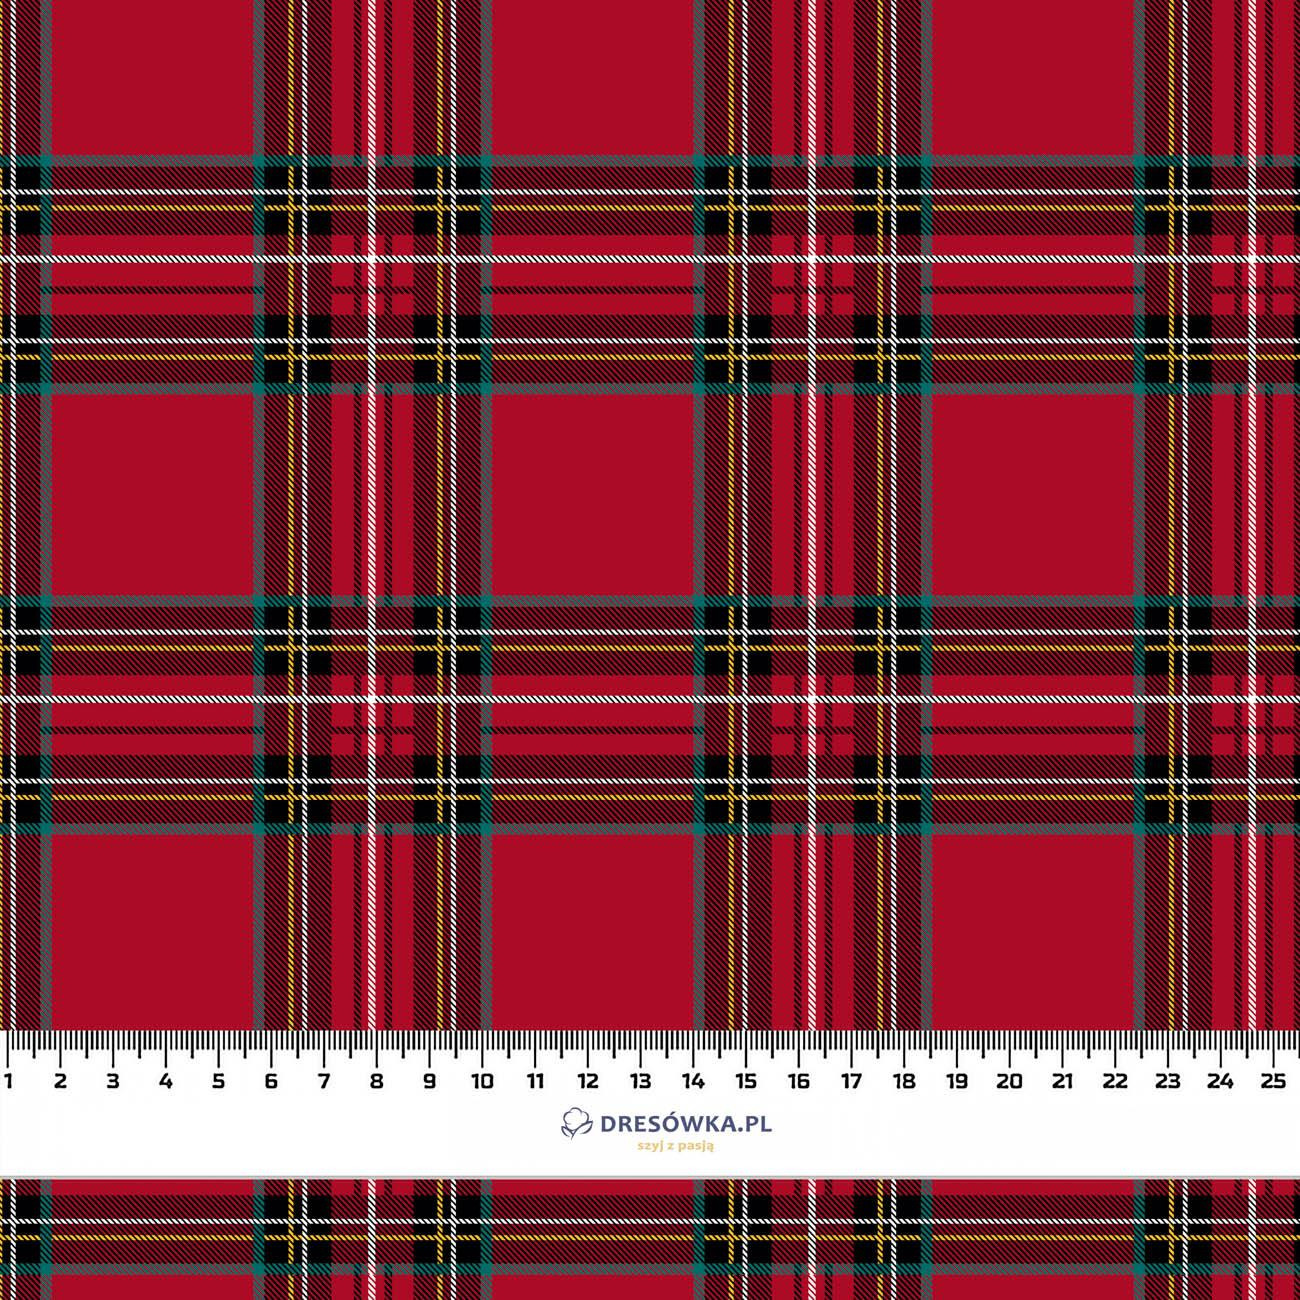 100CM CHECK PAT. 12 / red - Woven Fabric for tablecloths